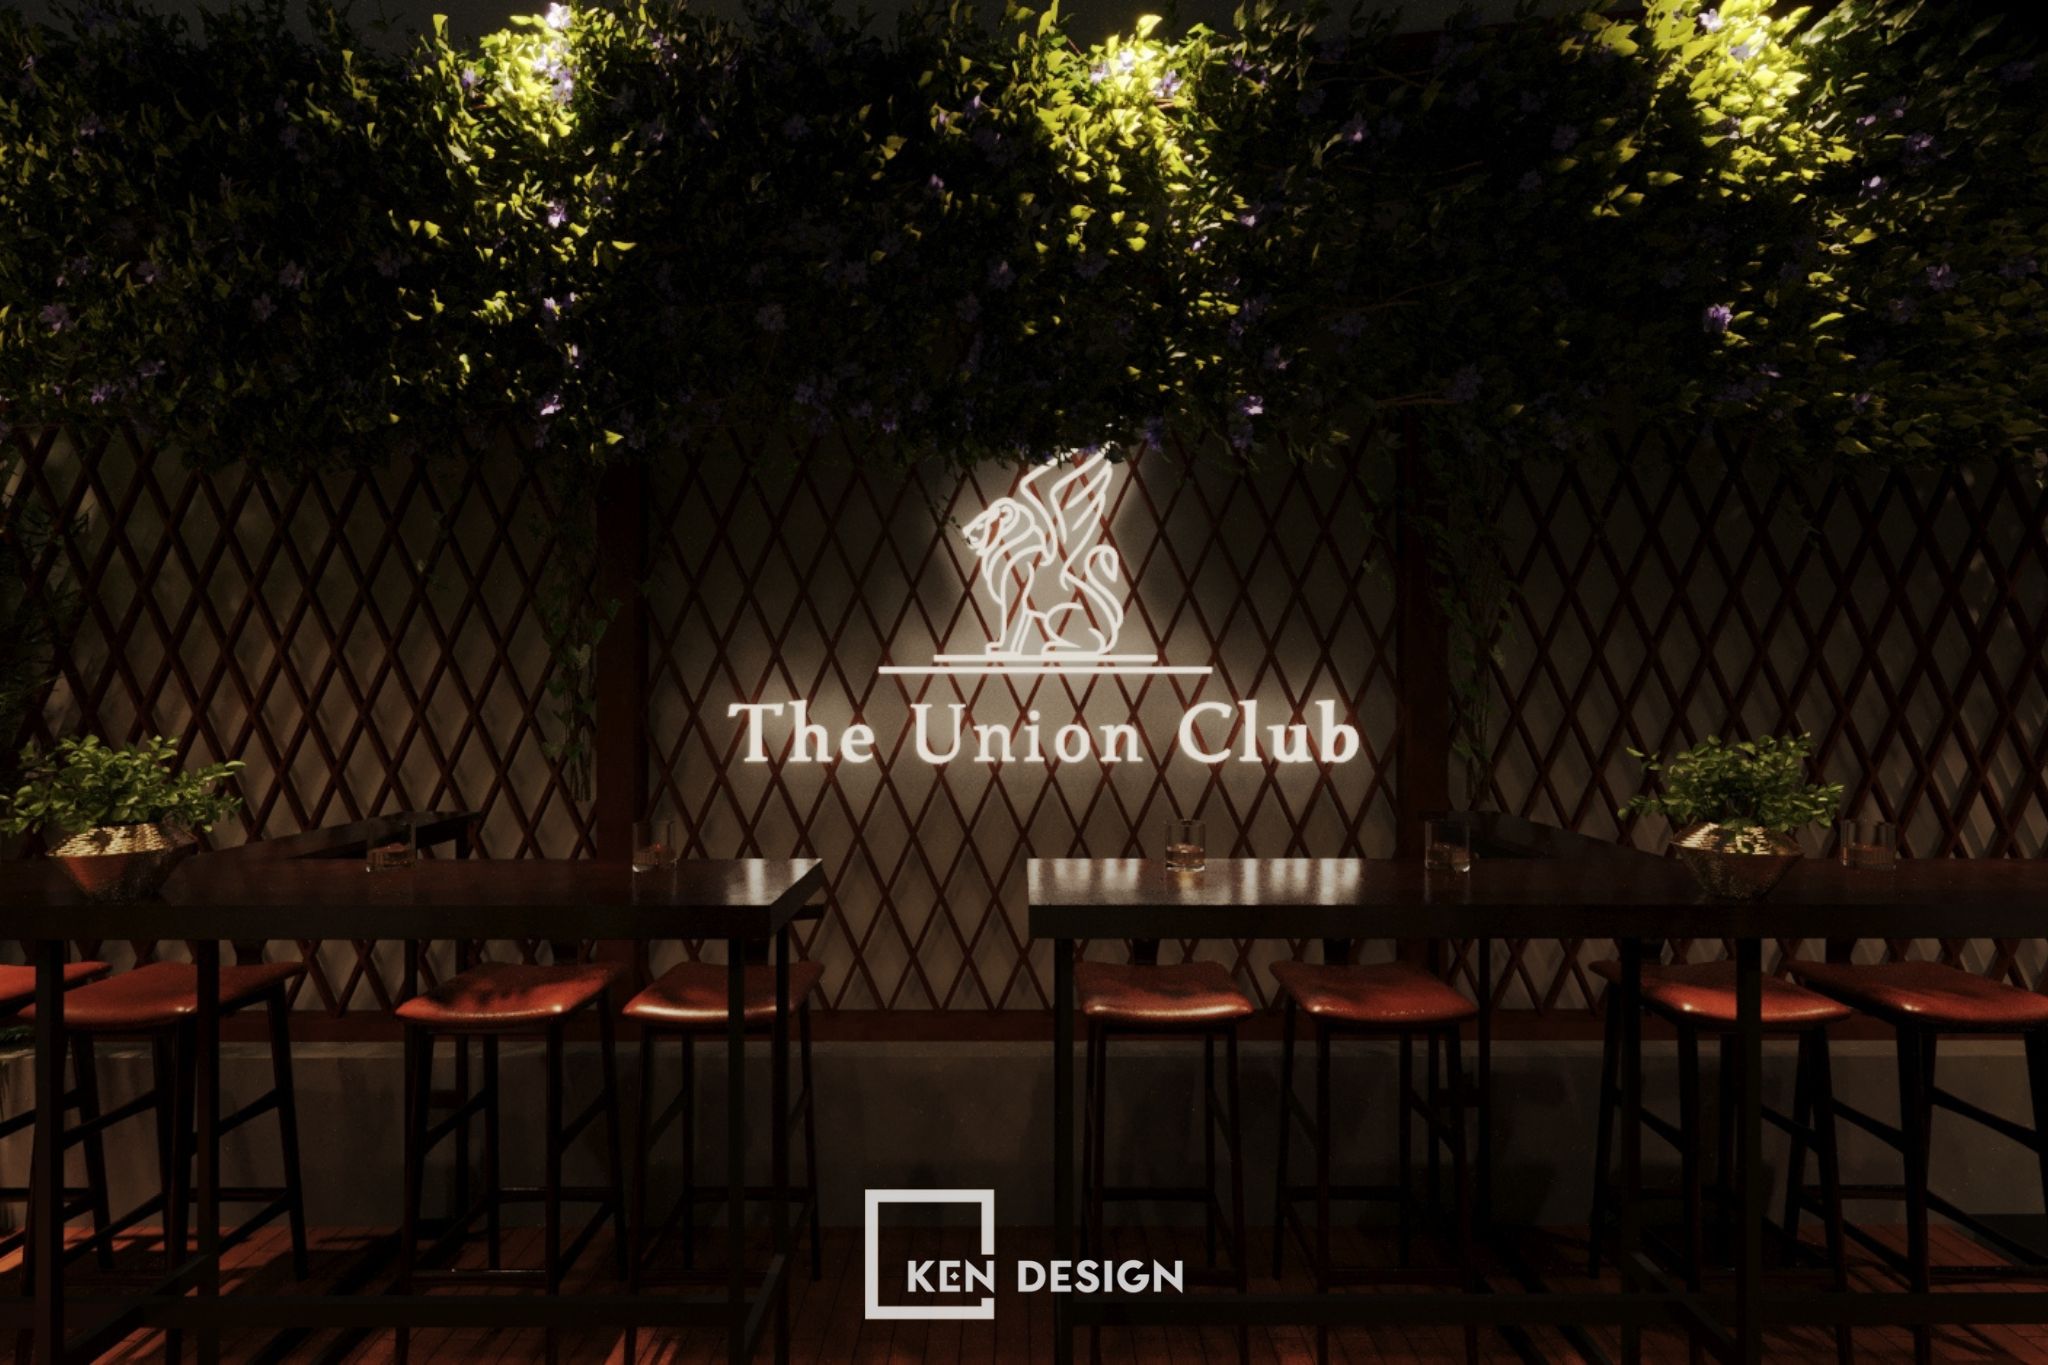 The design of The Union Club